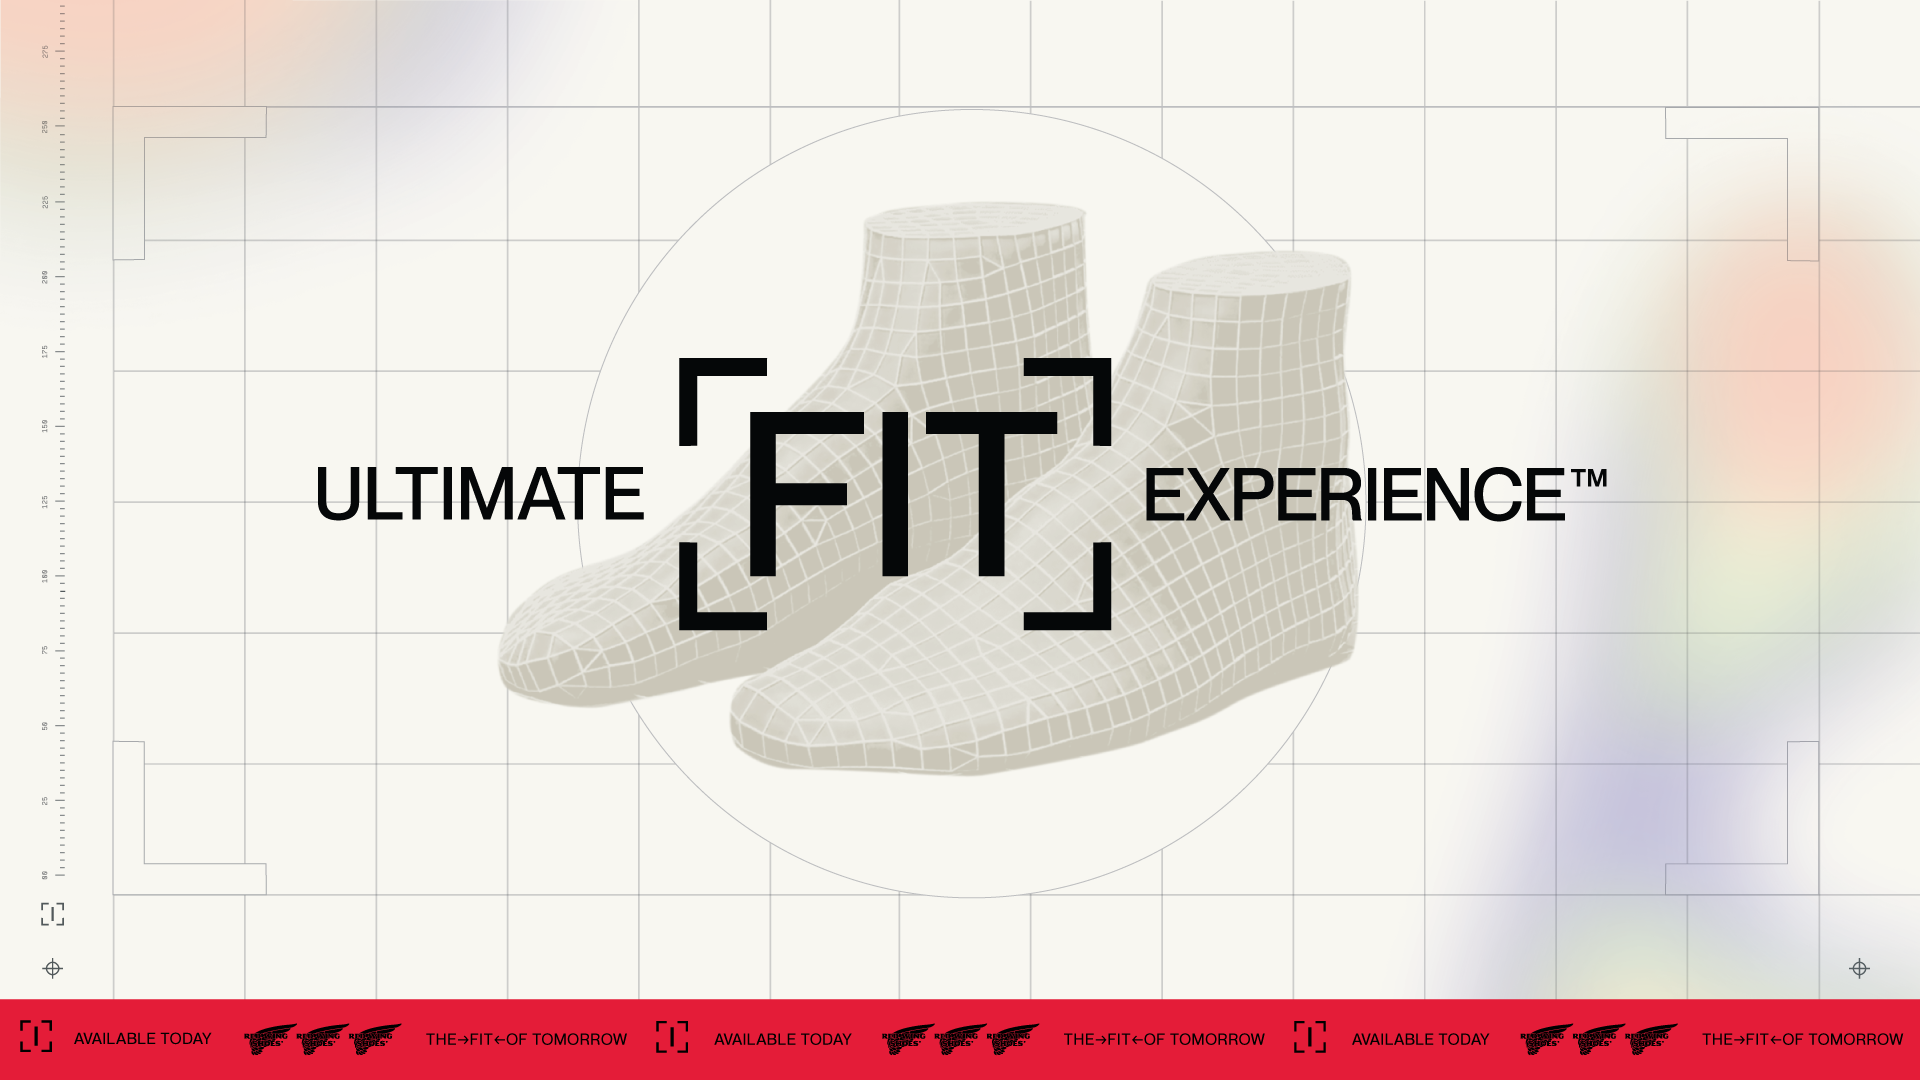 Learn more about the ultimate fit experience